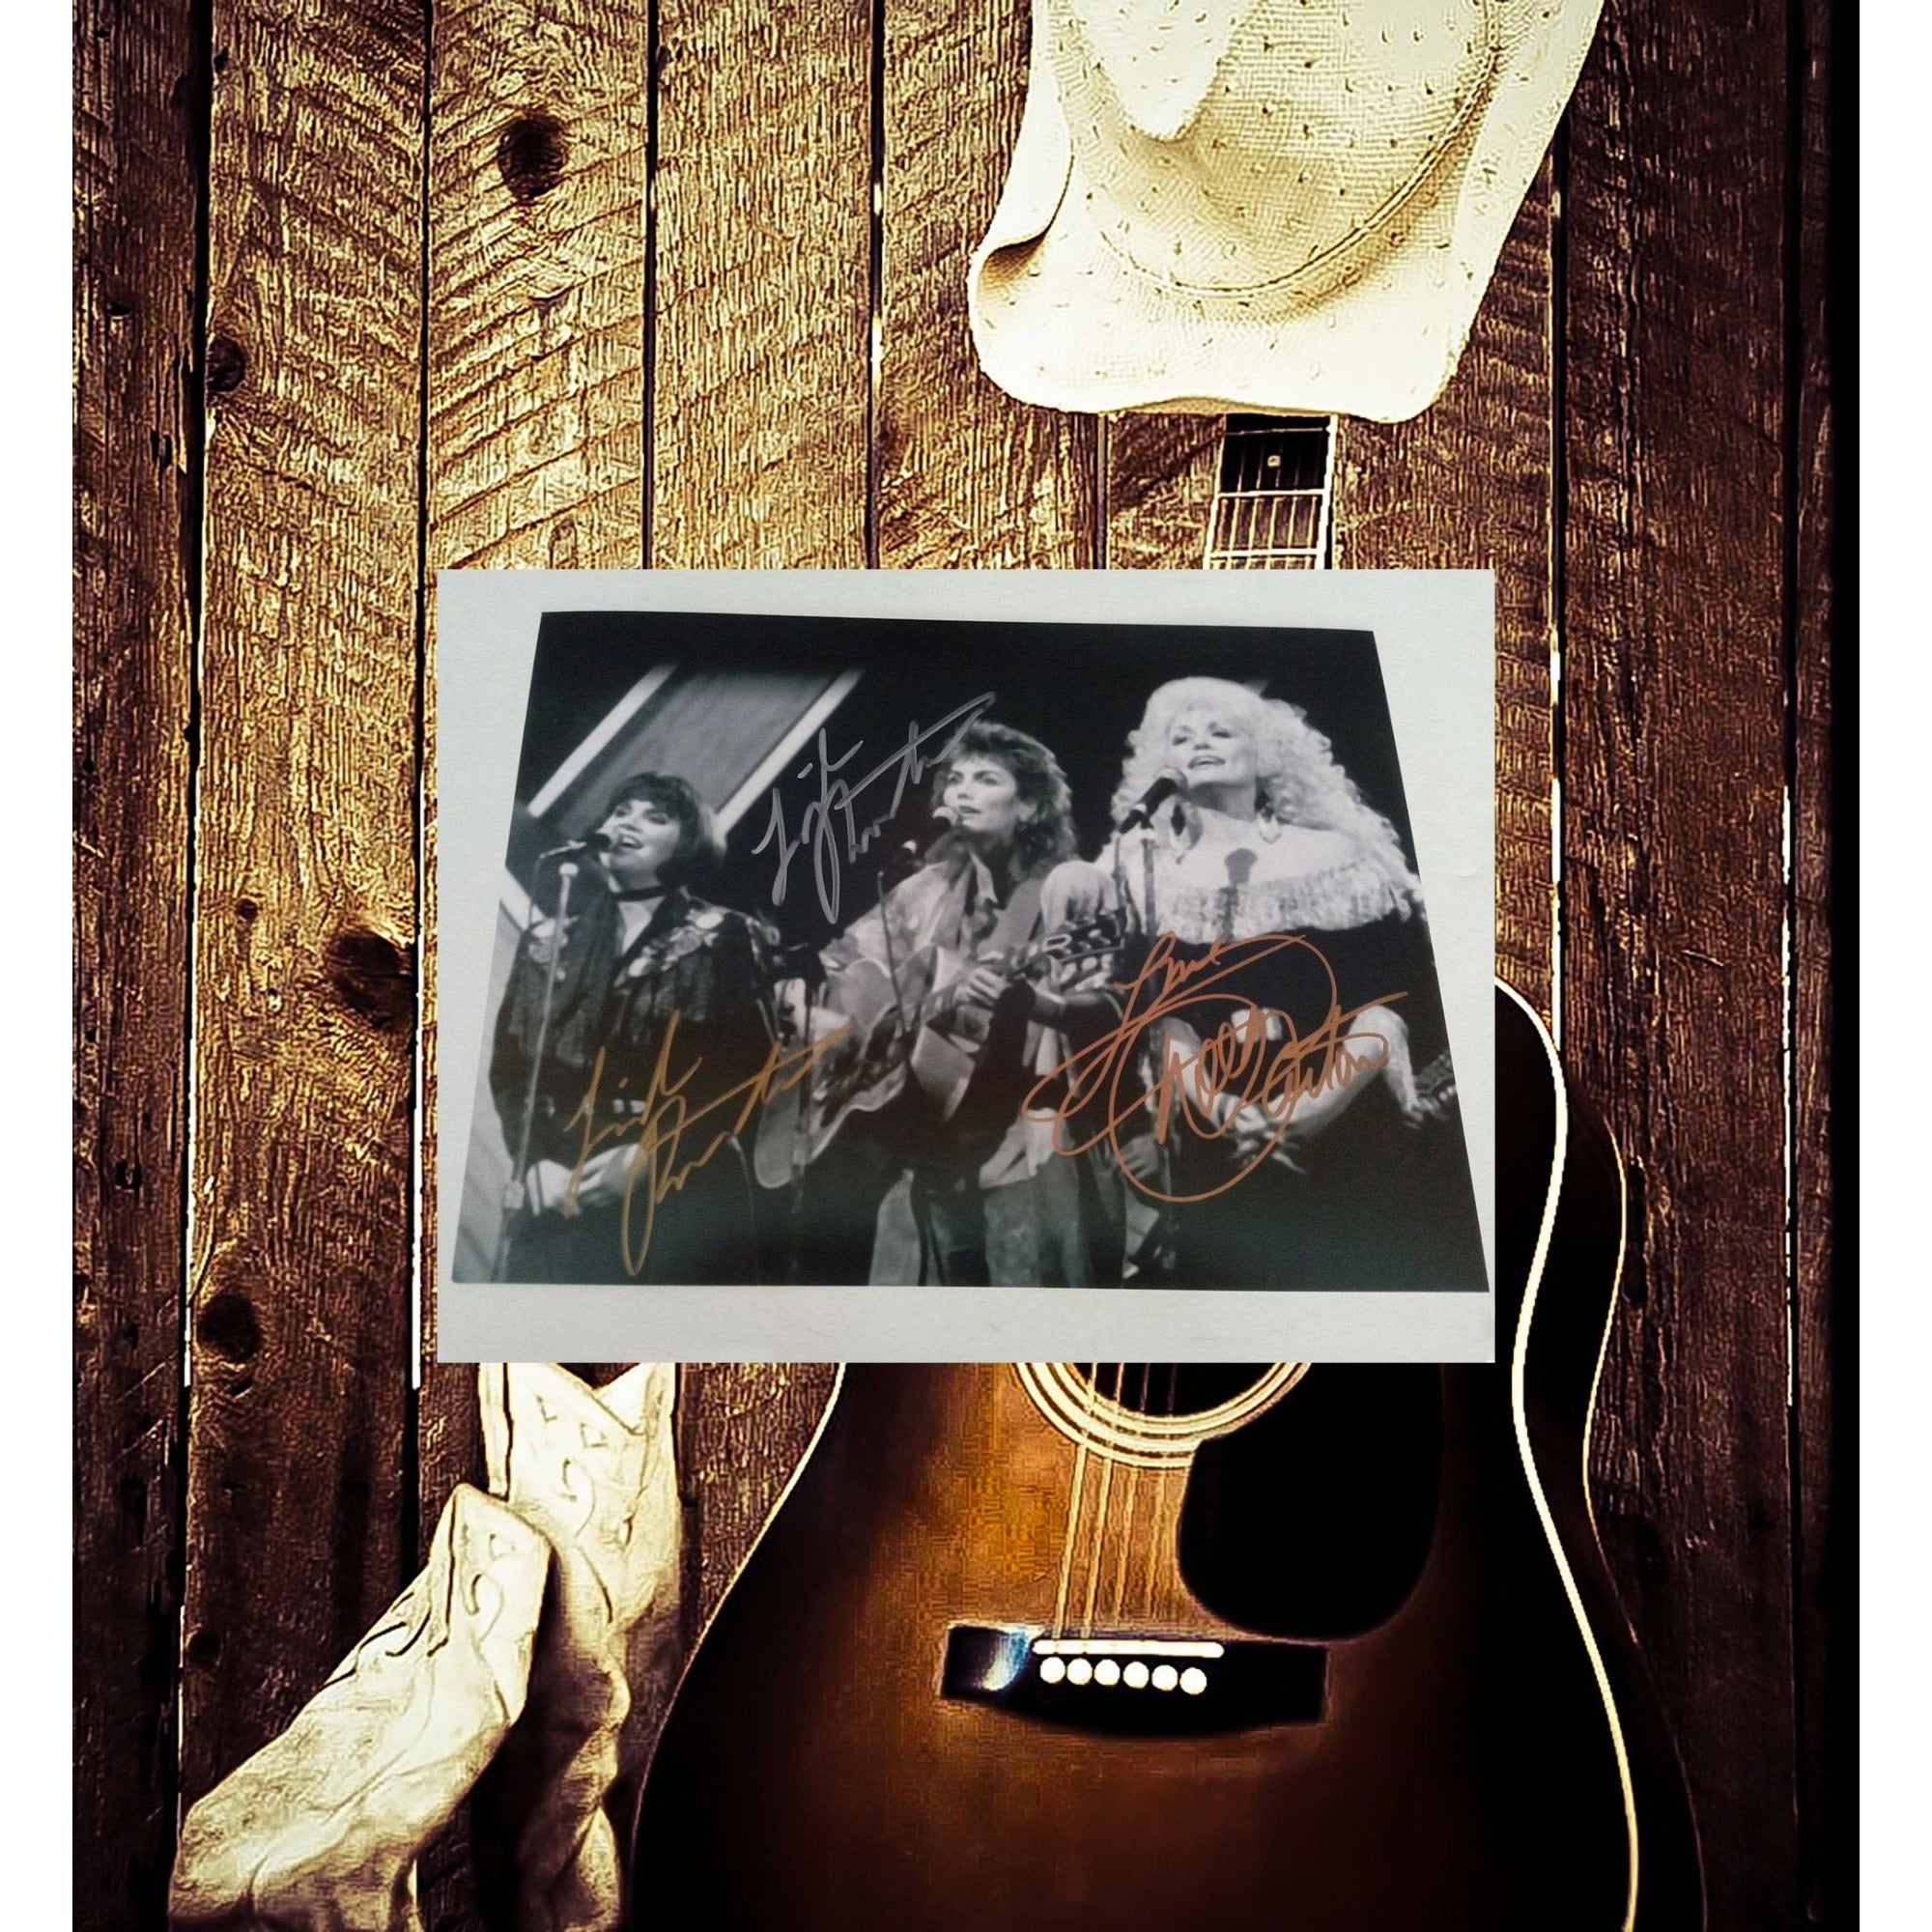 Dolly Parton, Emmylou Harris and Linda Ronstadt 8 by 10 signed photo with proof